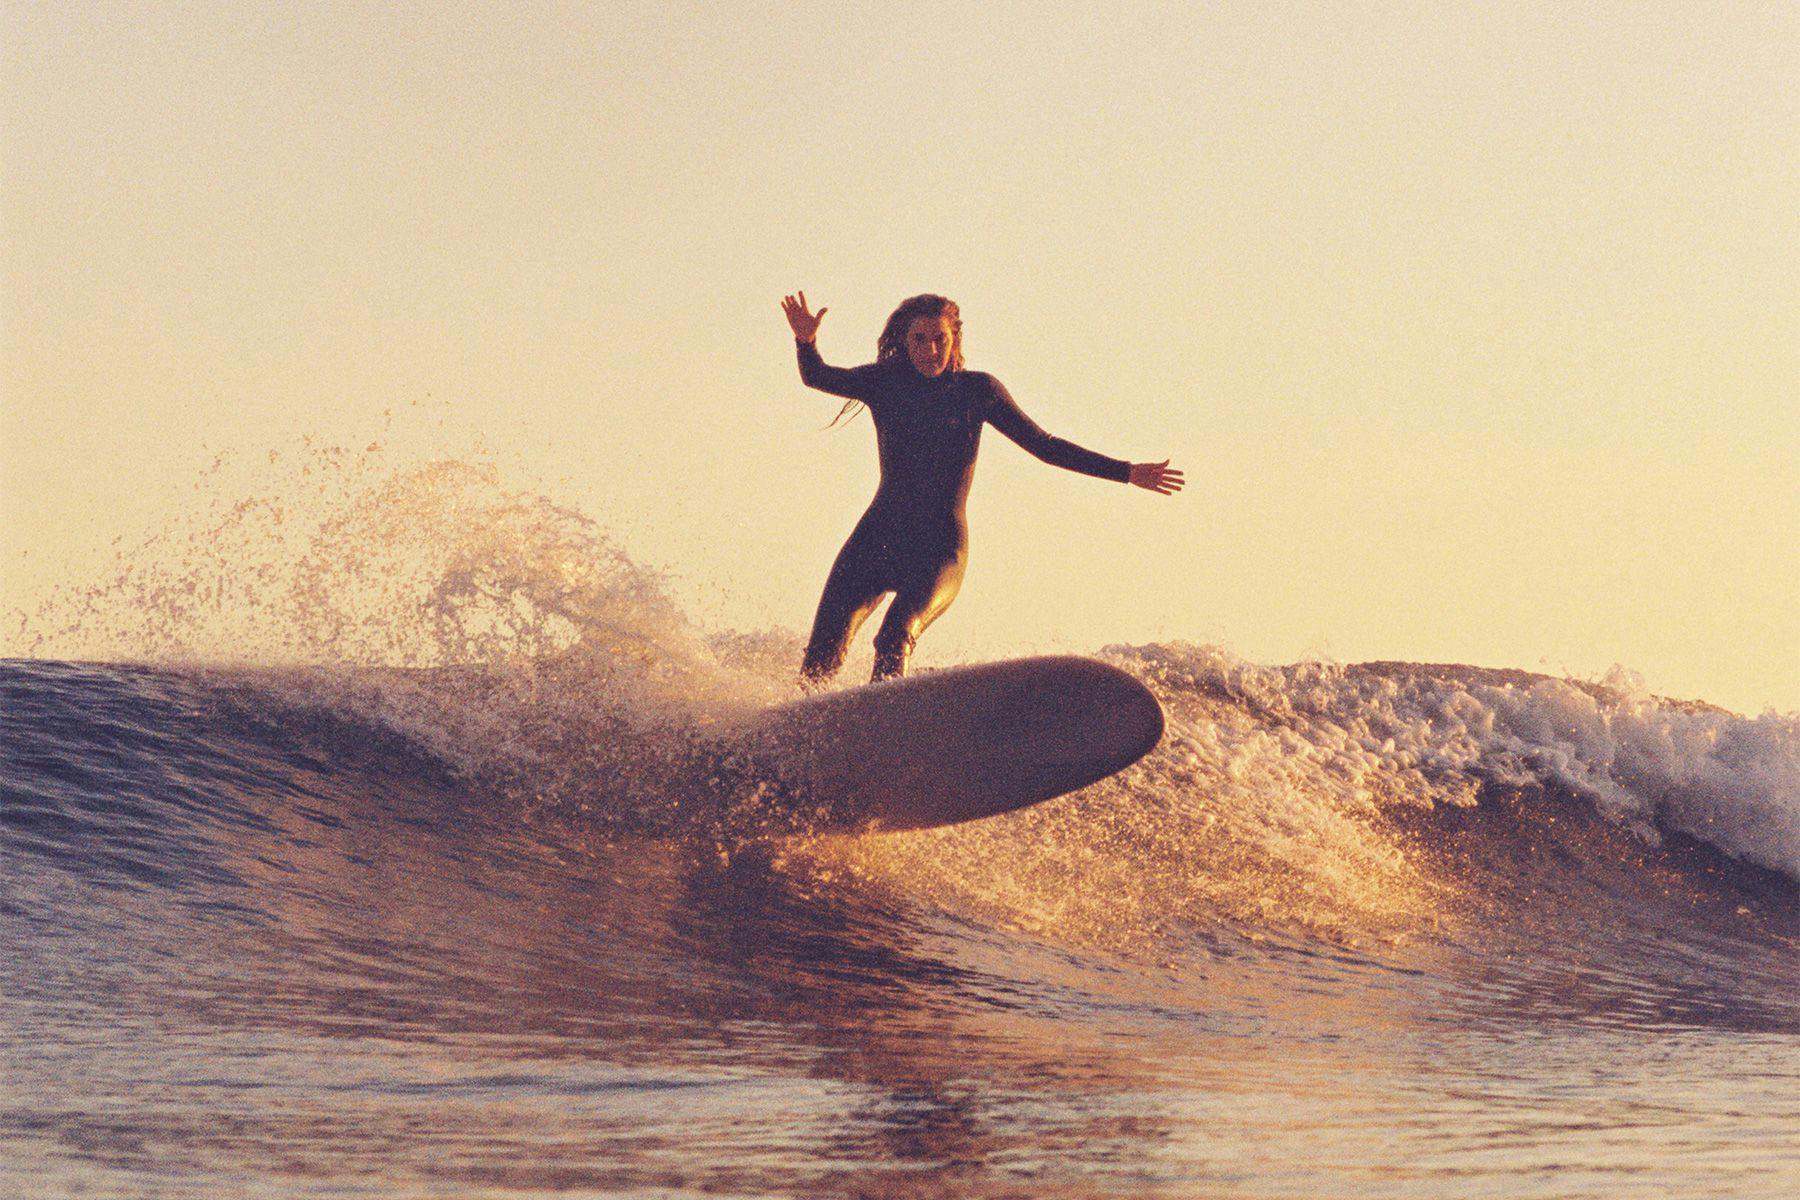 woman on a longboard surfboard cutting back at malibu in golden evening light, shot on a nikonos film camera by grant musso